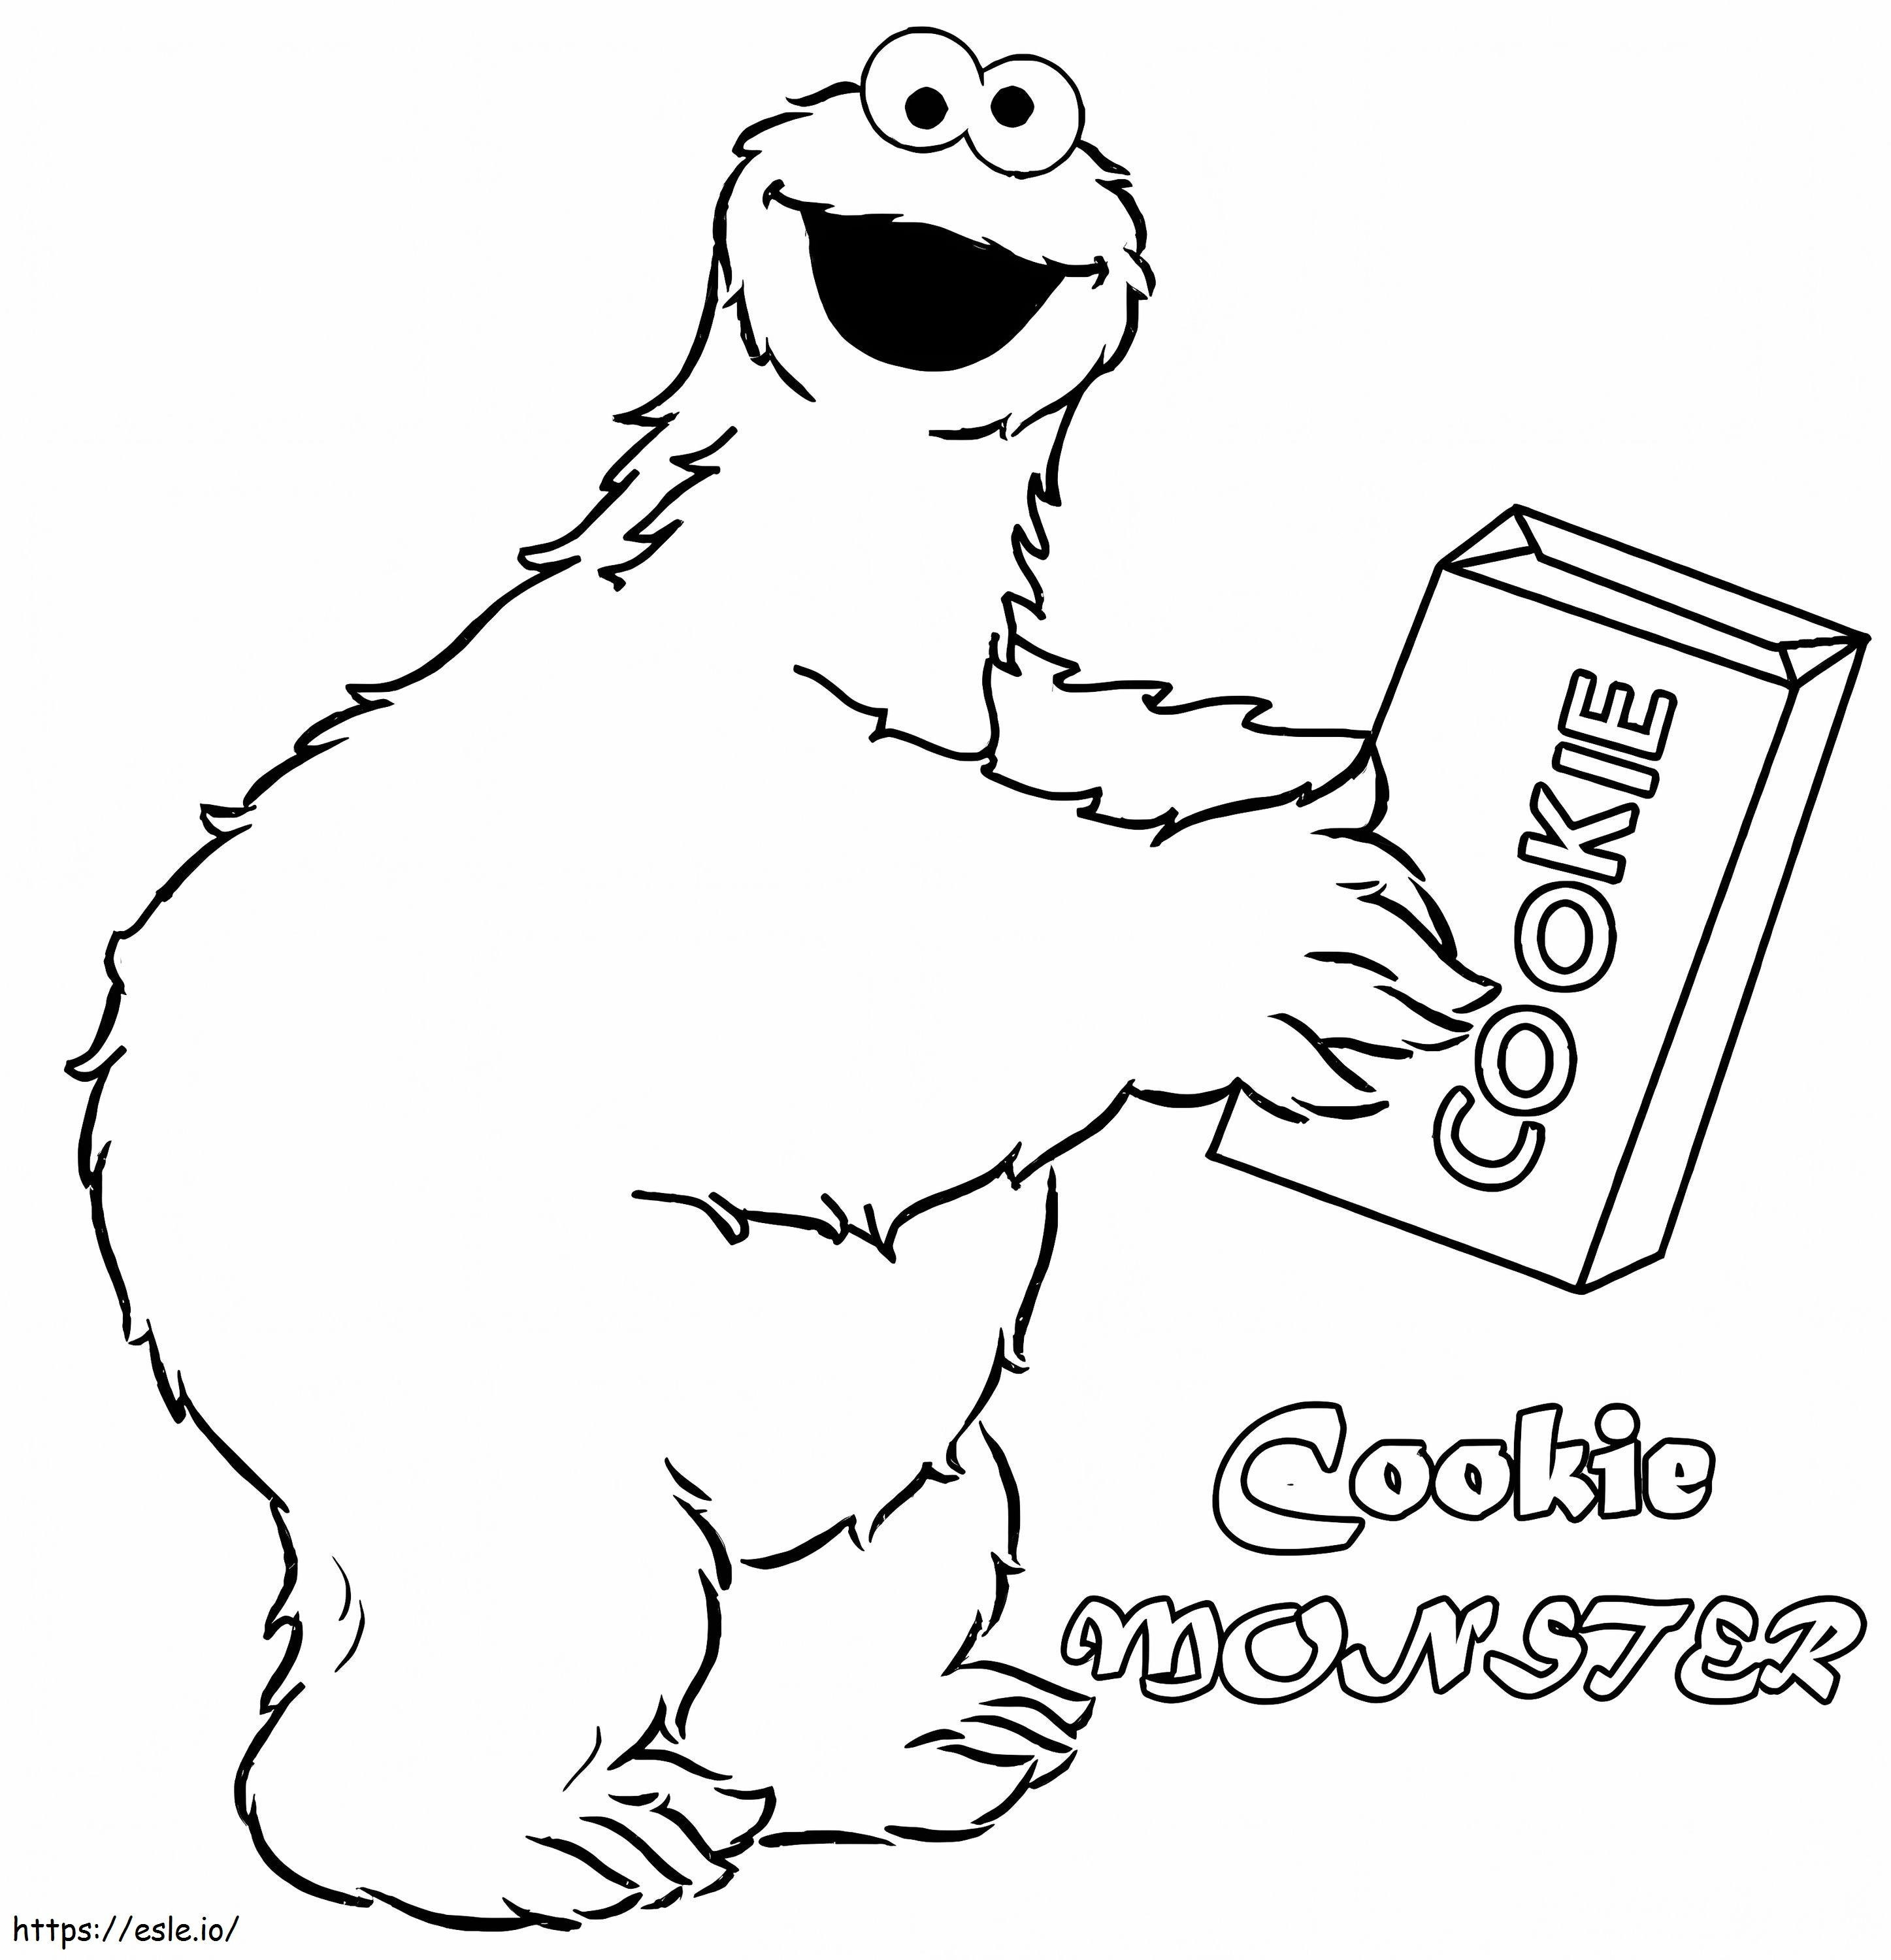 Funny Cookie Monster coloring page